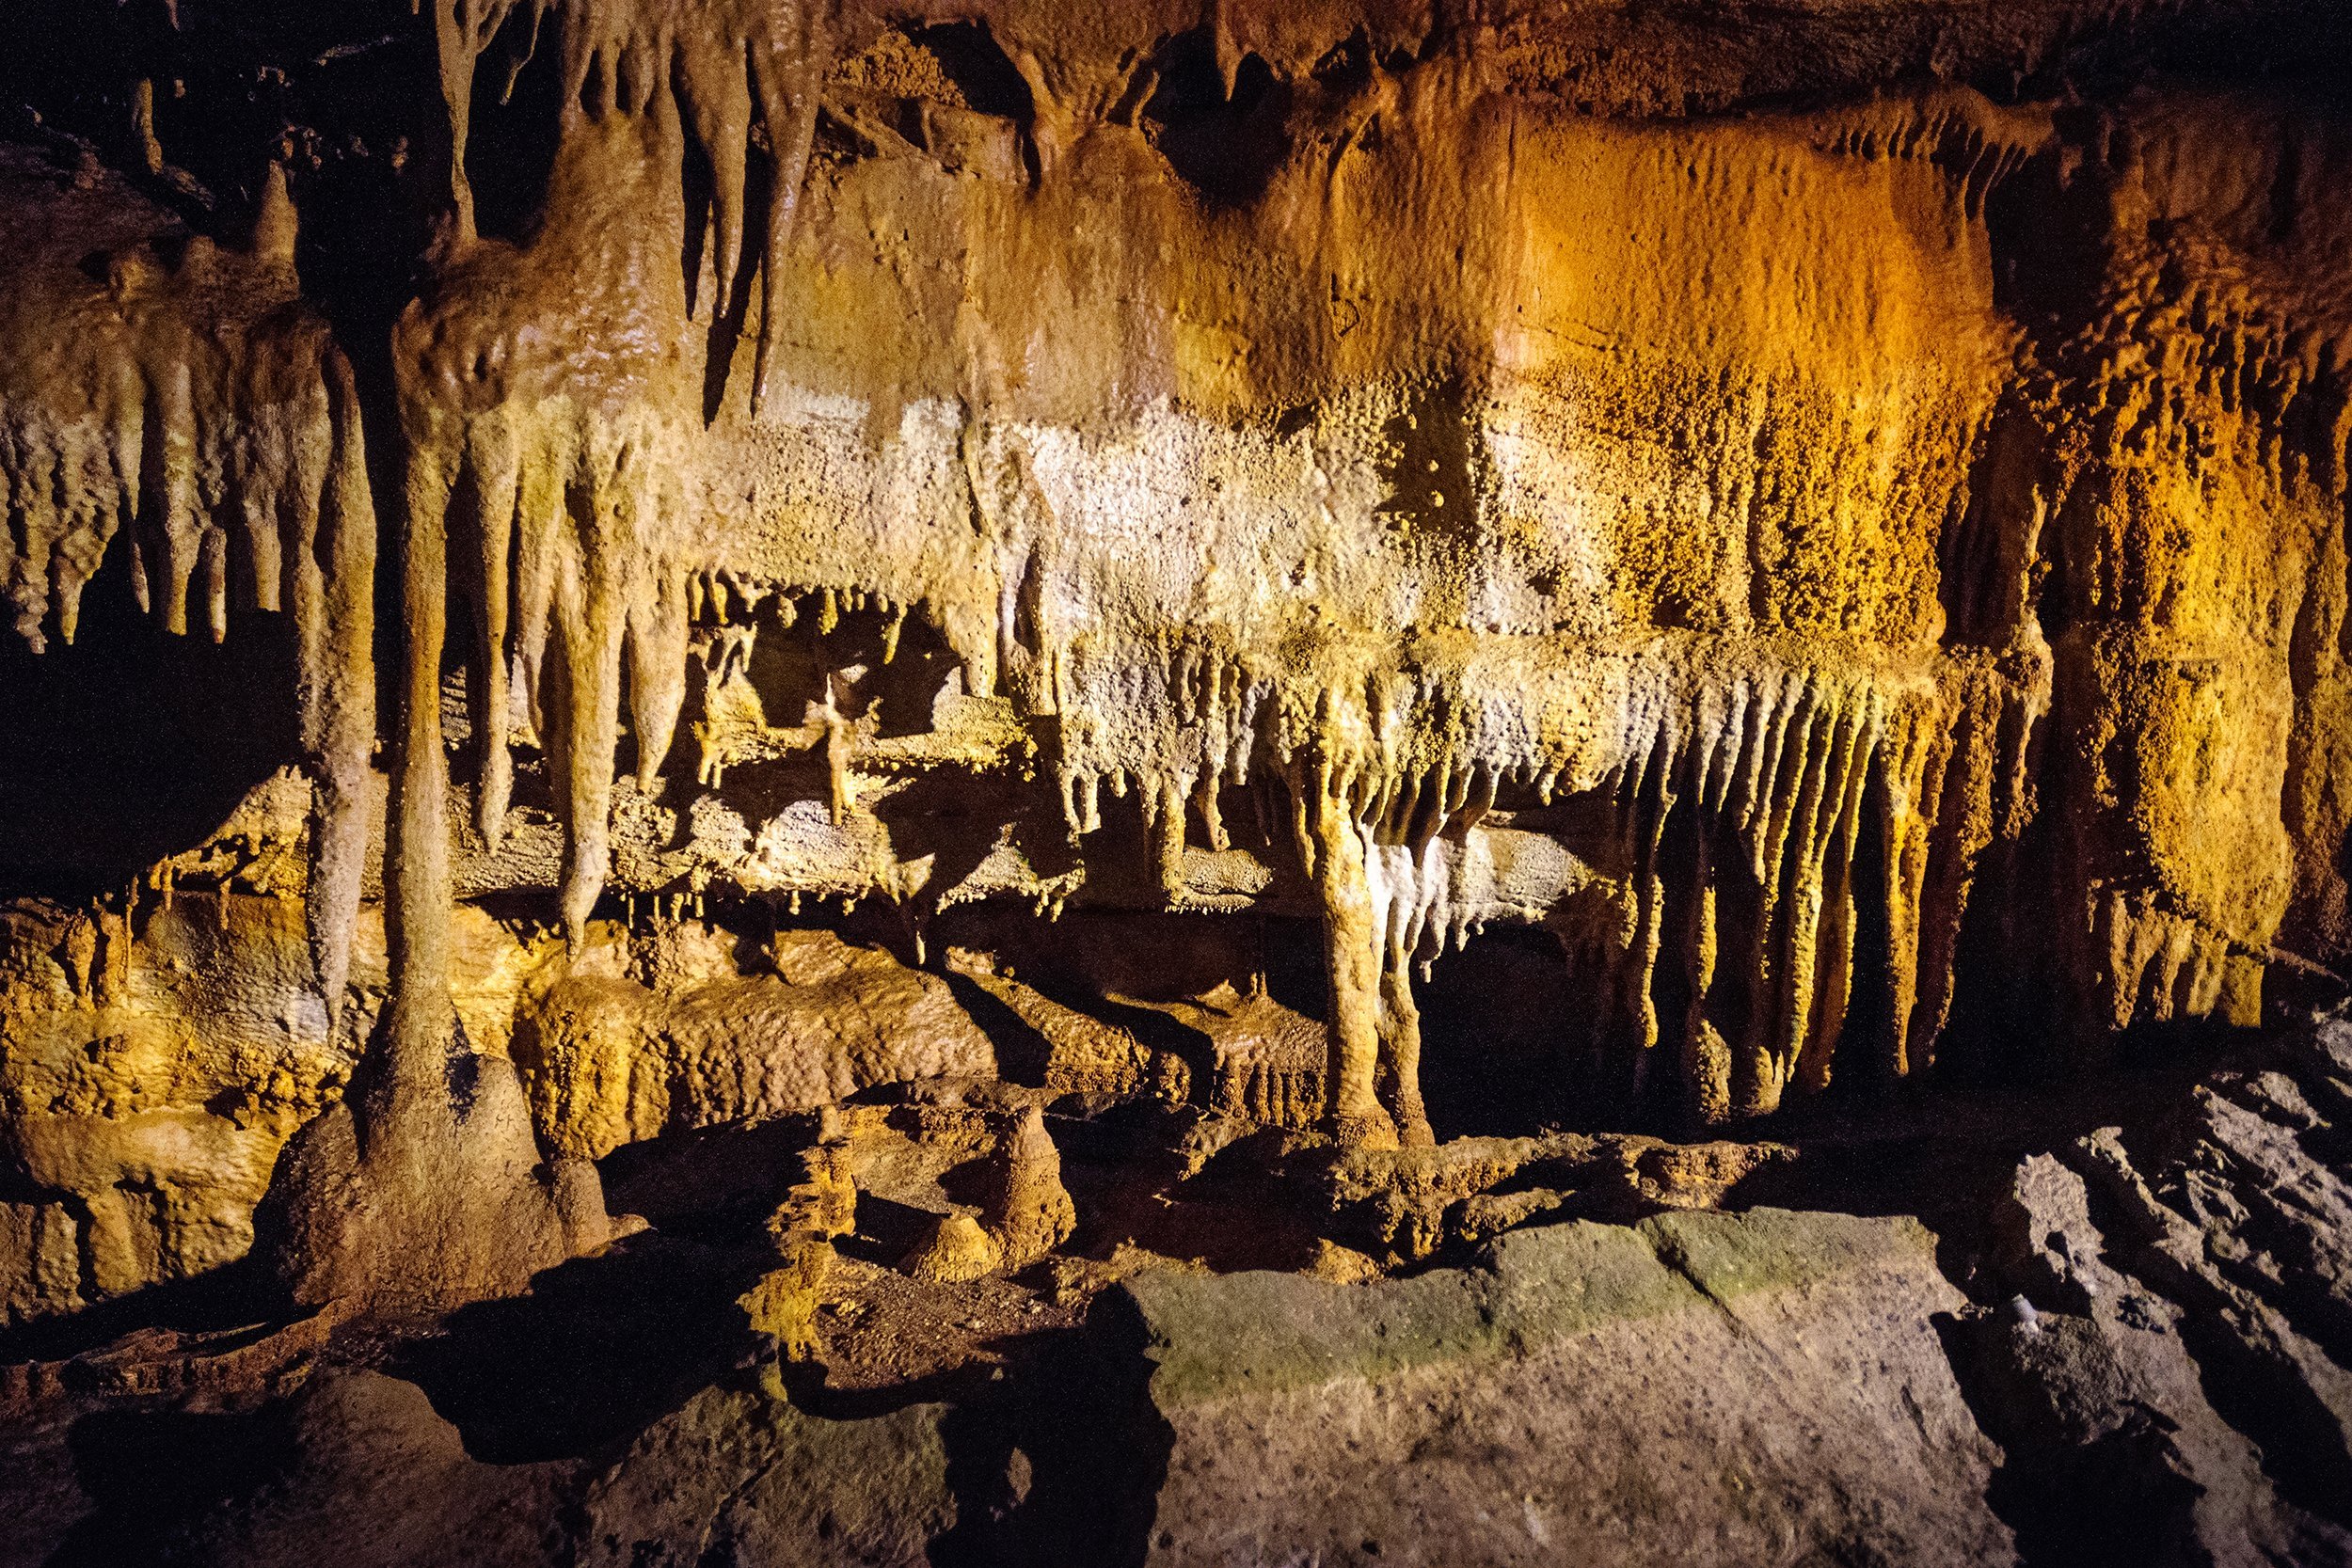 <p>Home of the world's longest known cave system — at least 400 miles — <a href="https://www.nps.gov/maca/index.htm">Mammoth Cave National Park</a> also offers hiking trails and canoeing for those more comfortable with above-ground exploration. To visit the caves, sign up for one of the many ranger-led tours. Tickets range from $4 to $66 each depending on the type of tour and visitors' ages. It’s one of America’s best <a href="https://www.cheapism.com/blog/underground-places-to-visit-13968/">underground spaces to explore</a>.</p>